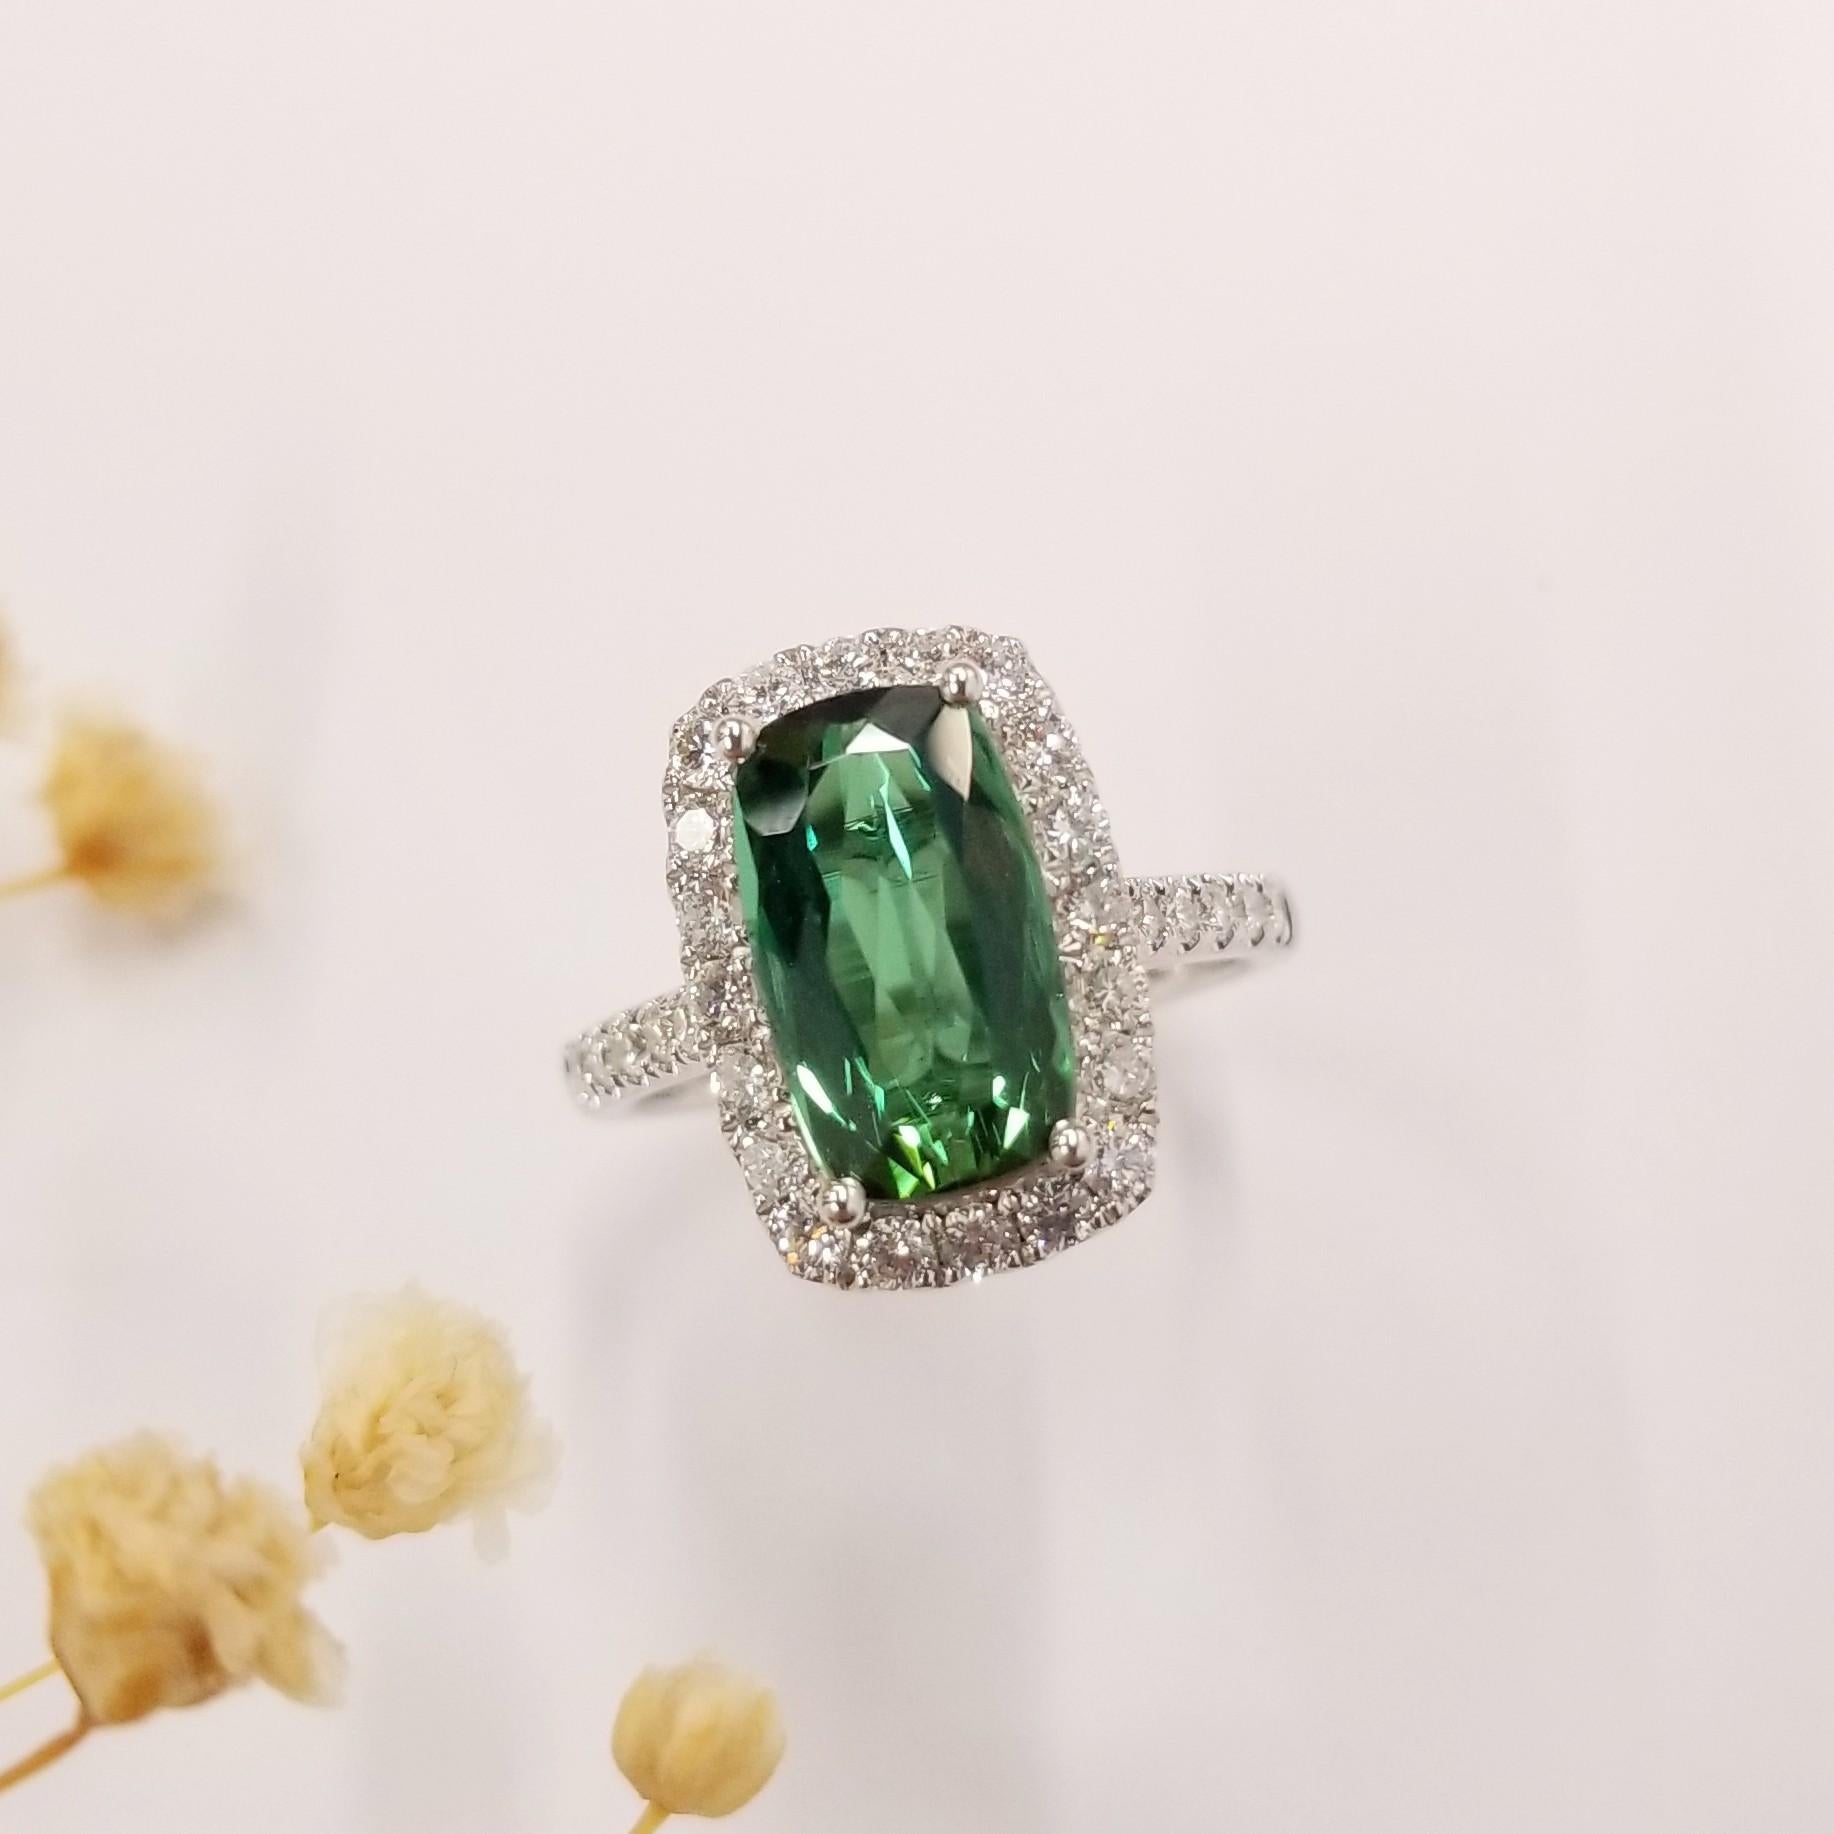 Introducing a magnificent piece of jewelry showcasing an IGI Certified 2.73 Carat Tourmaline in a mesmerizing intense green color. This rare gemstone, with an exceptionally long cushion shape, takes center stage in a modern style ring crafted from